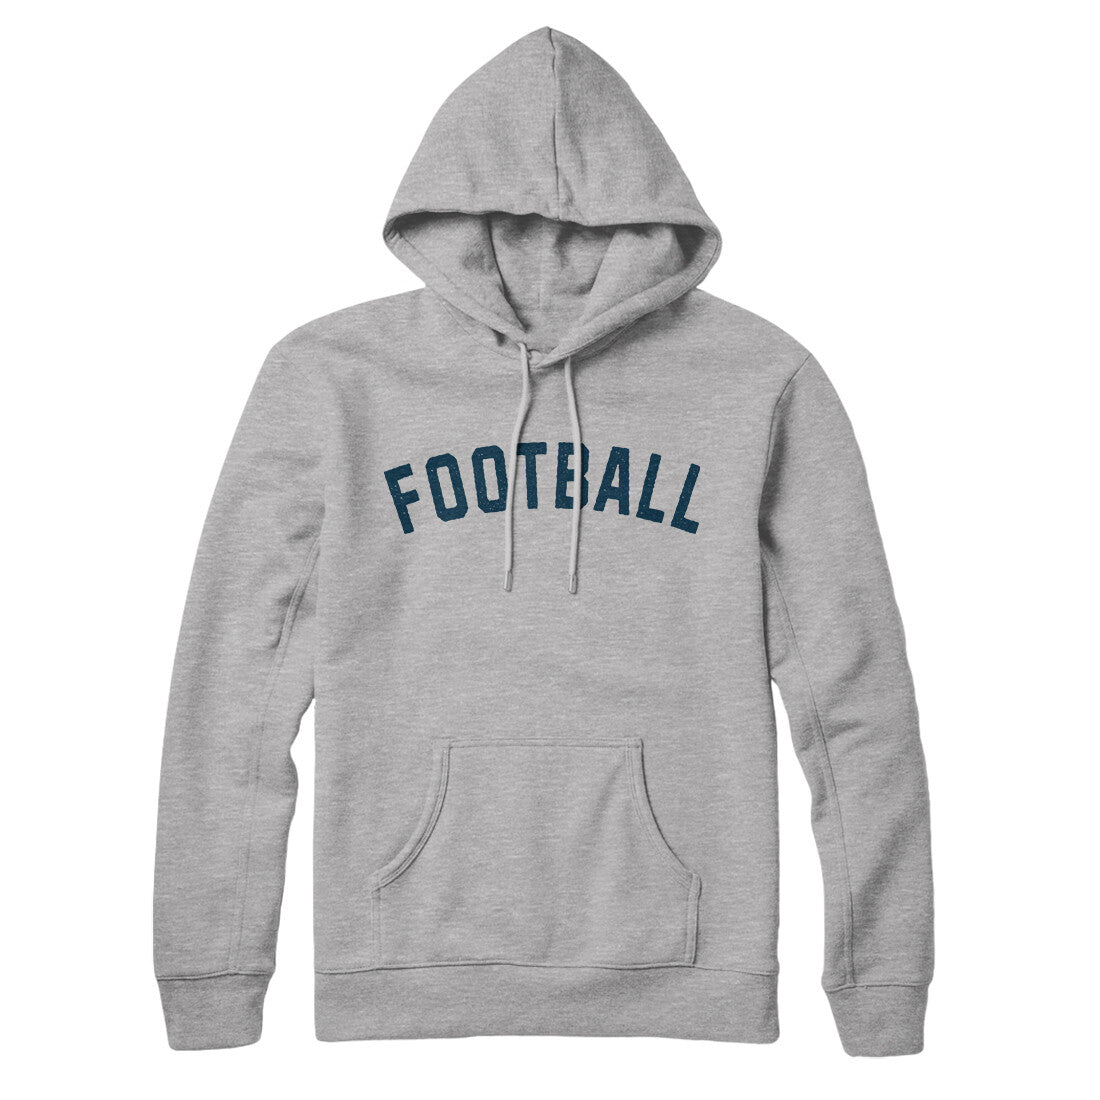 Football in Heather Grey Color